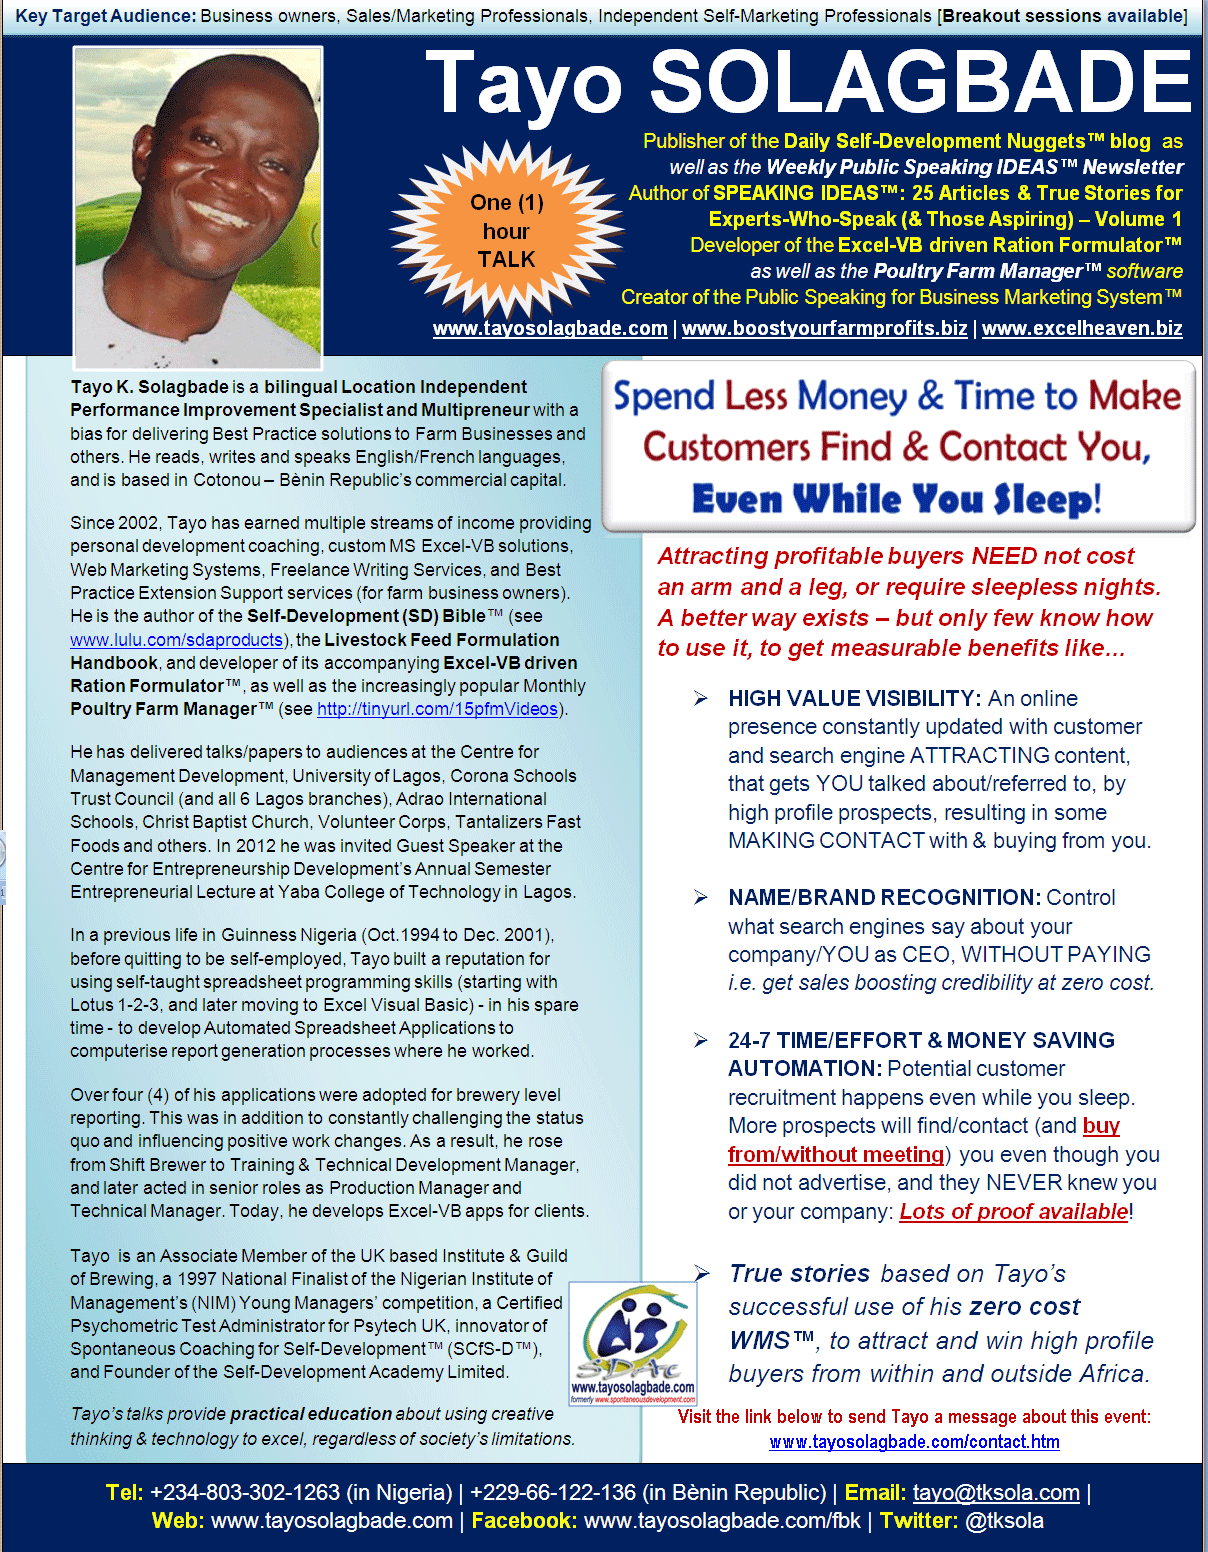 Click to download - PDF Speaker One Sheet for Tayo Solagbade's ONE HOUR TALK titled 'Spend Less Money & Time to Make Customers Find & Contact You, Even While You Sleep!' 